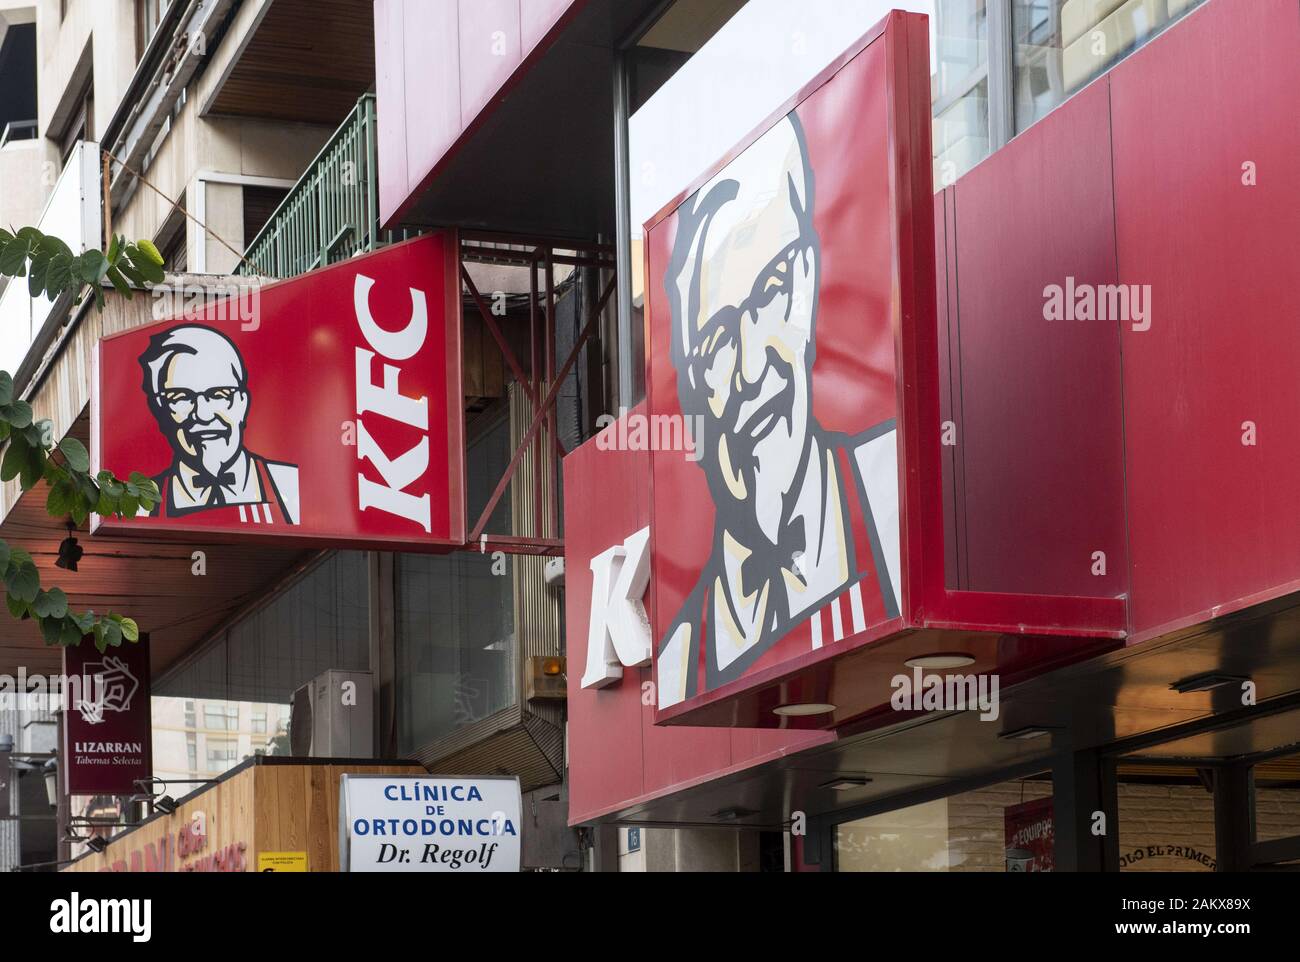 January 10, 2020, Spain: American fast food chicken restaurant chain Kentucky Fried Chicken KFC restaurant and logo seen in Spain. (Credit Image: © Budrul Chukrut/SOPA Images via ZUMA Wire) Stock Photo